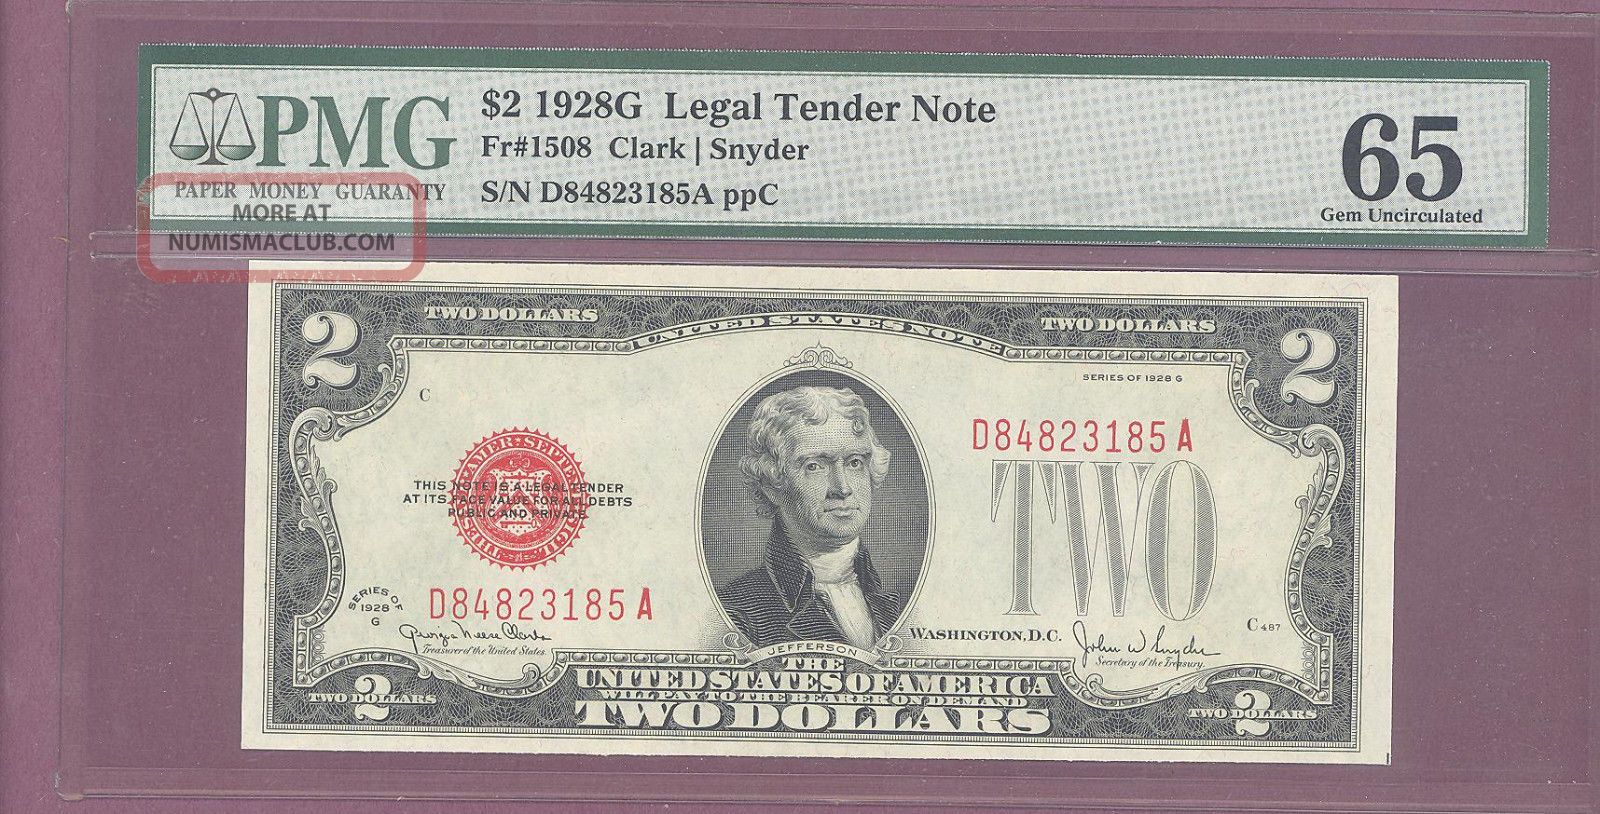 Red Seal 1928 G $2 Legal Tender Note Pmg 65 Gem Unc F : 1508 Clark - Snyder Ppc Small Size Notes photo